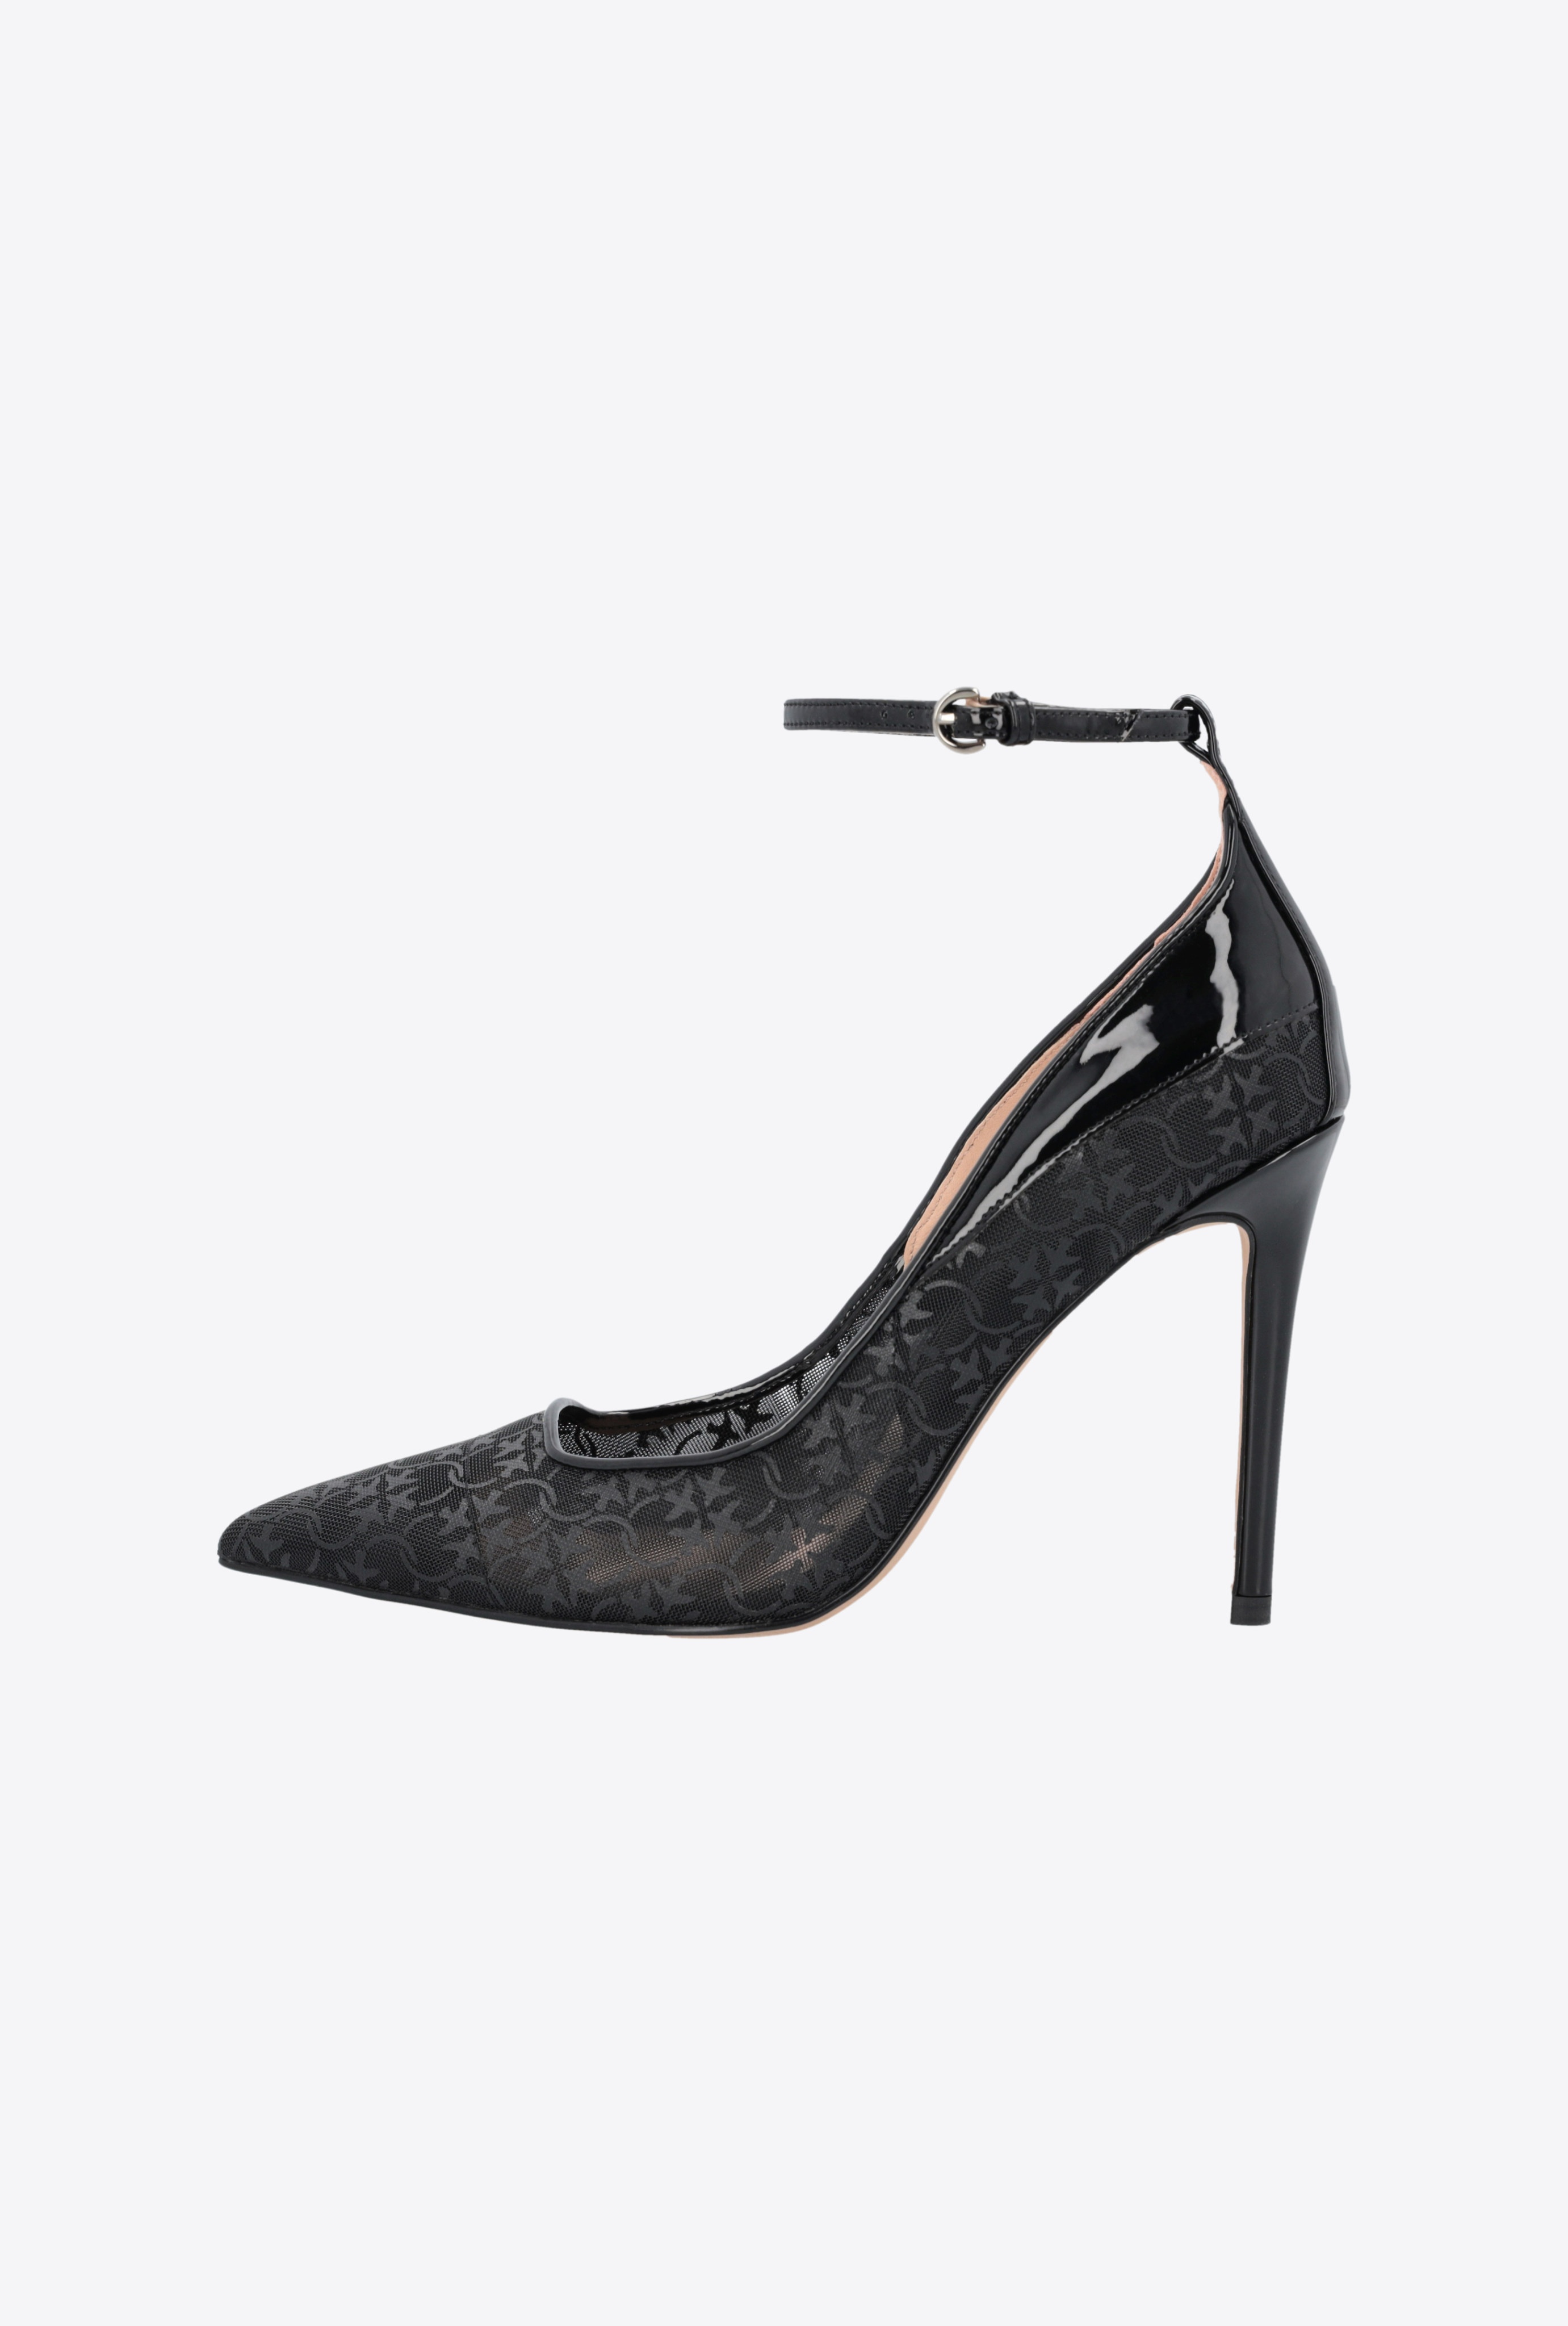 LOVE BIRDS PATENT AND MESH PUMPS - 5